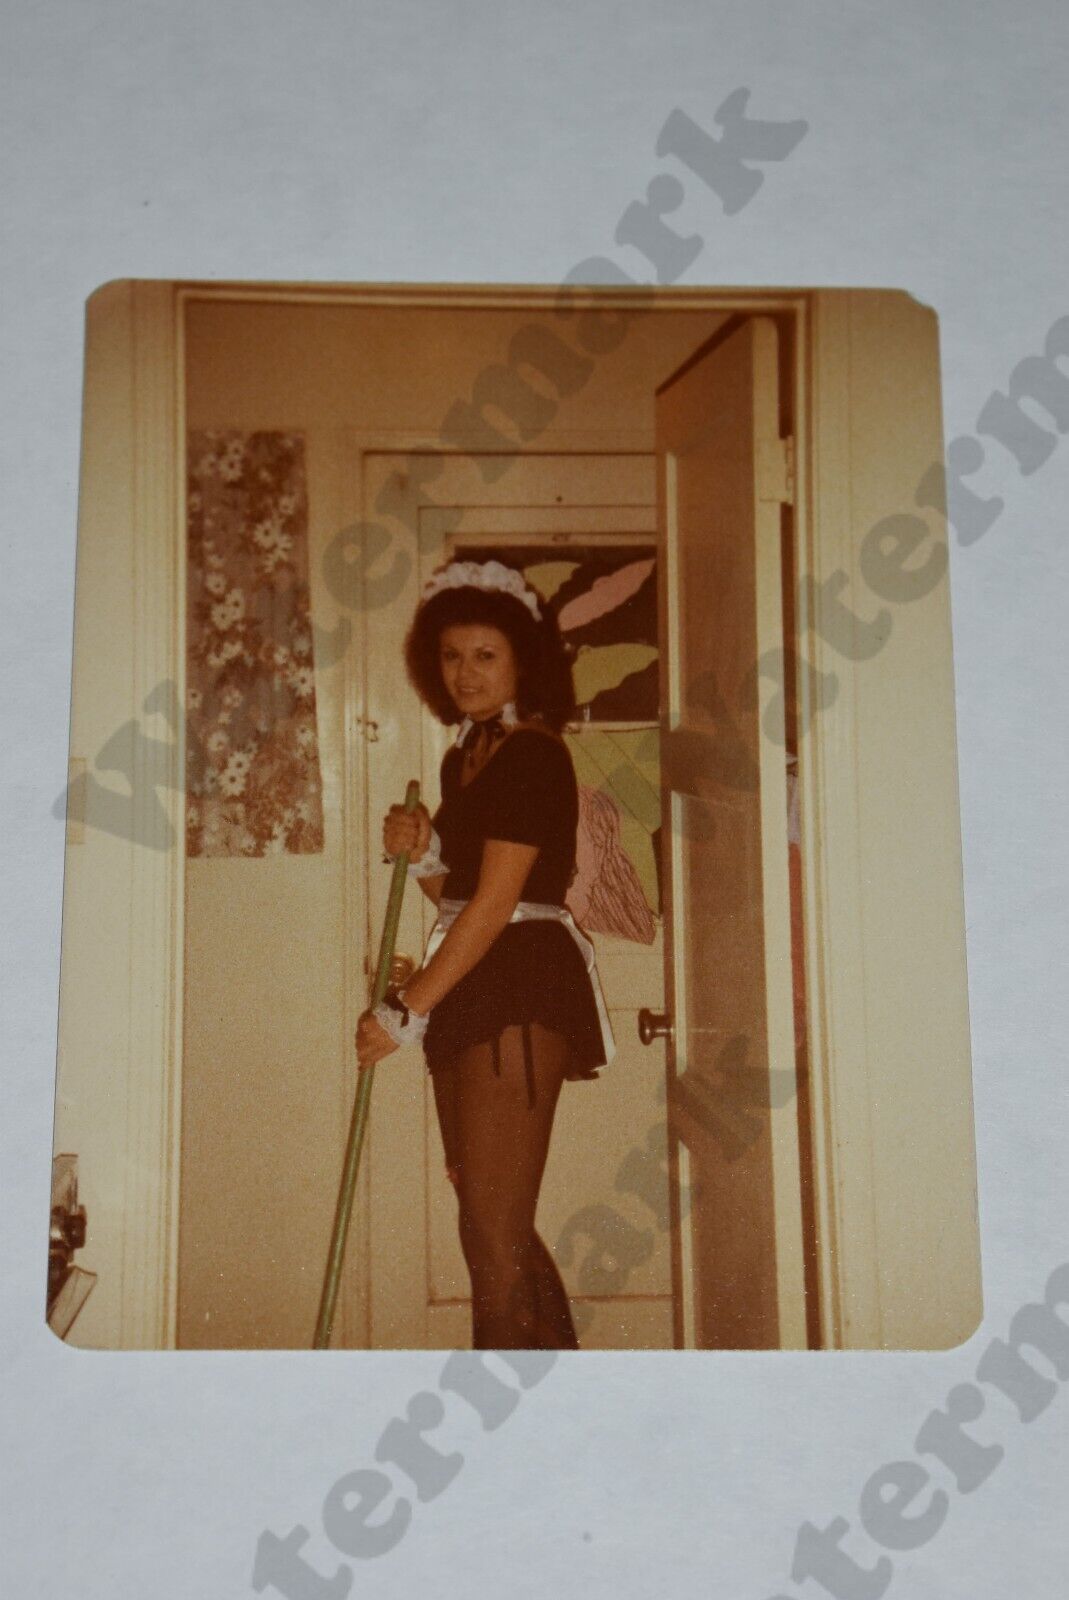 1980s candid pretty brunette woman french maid costume VINTAGE PHOTOGRAPH  Hj